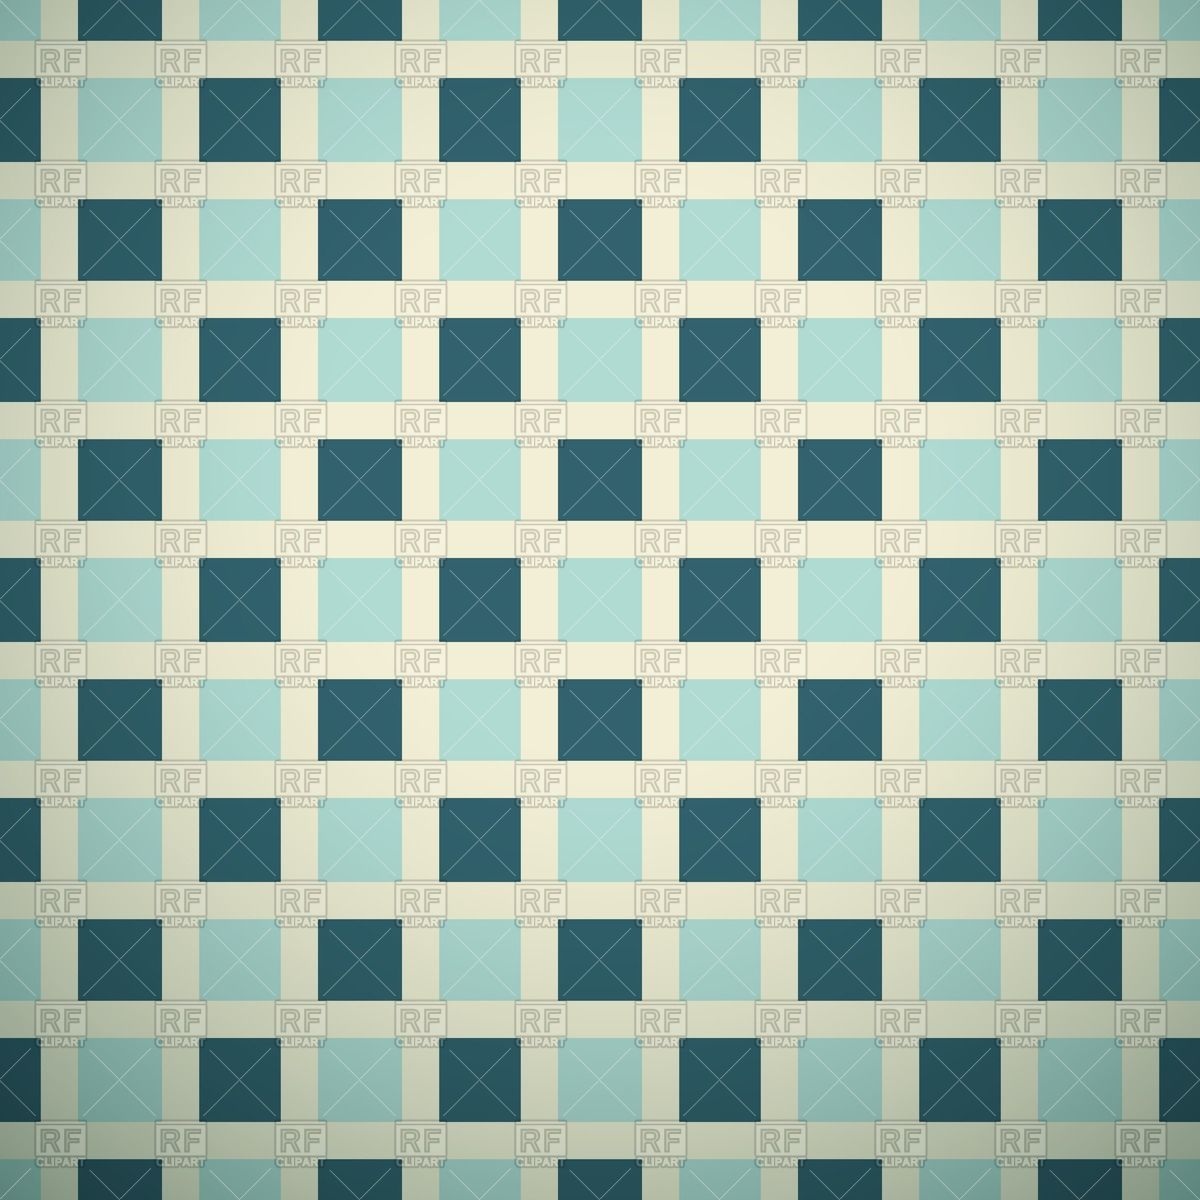 Checkered Retro Wallpaper Download Royalty Free Vector Clipart  Eps